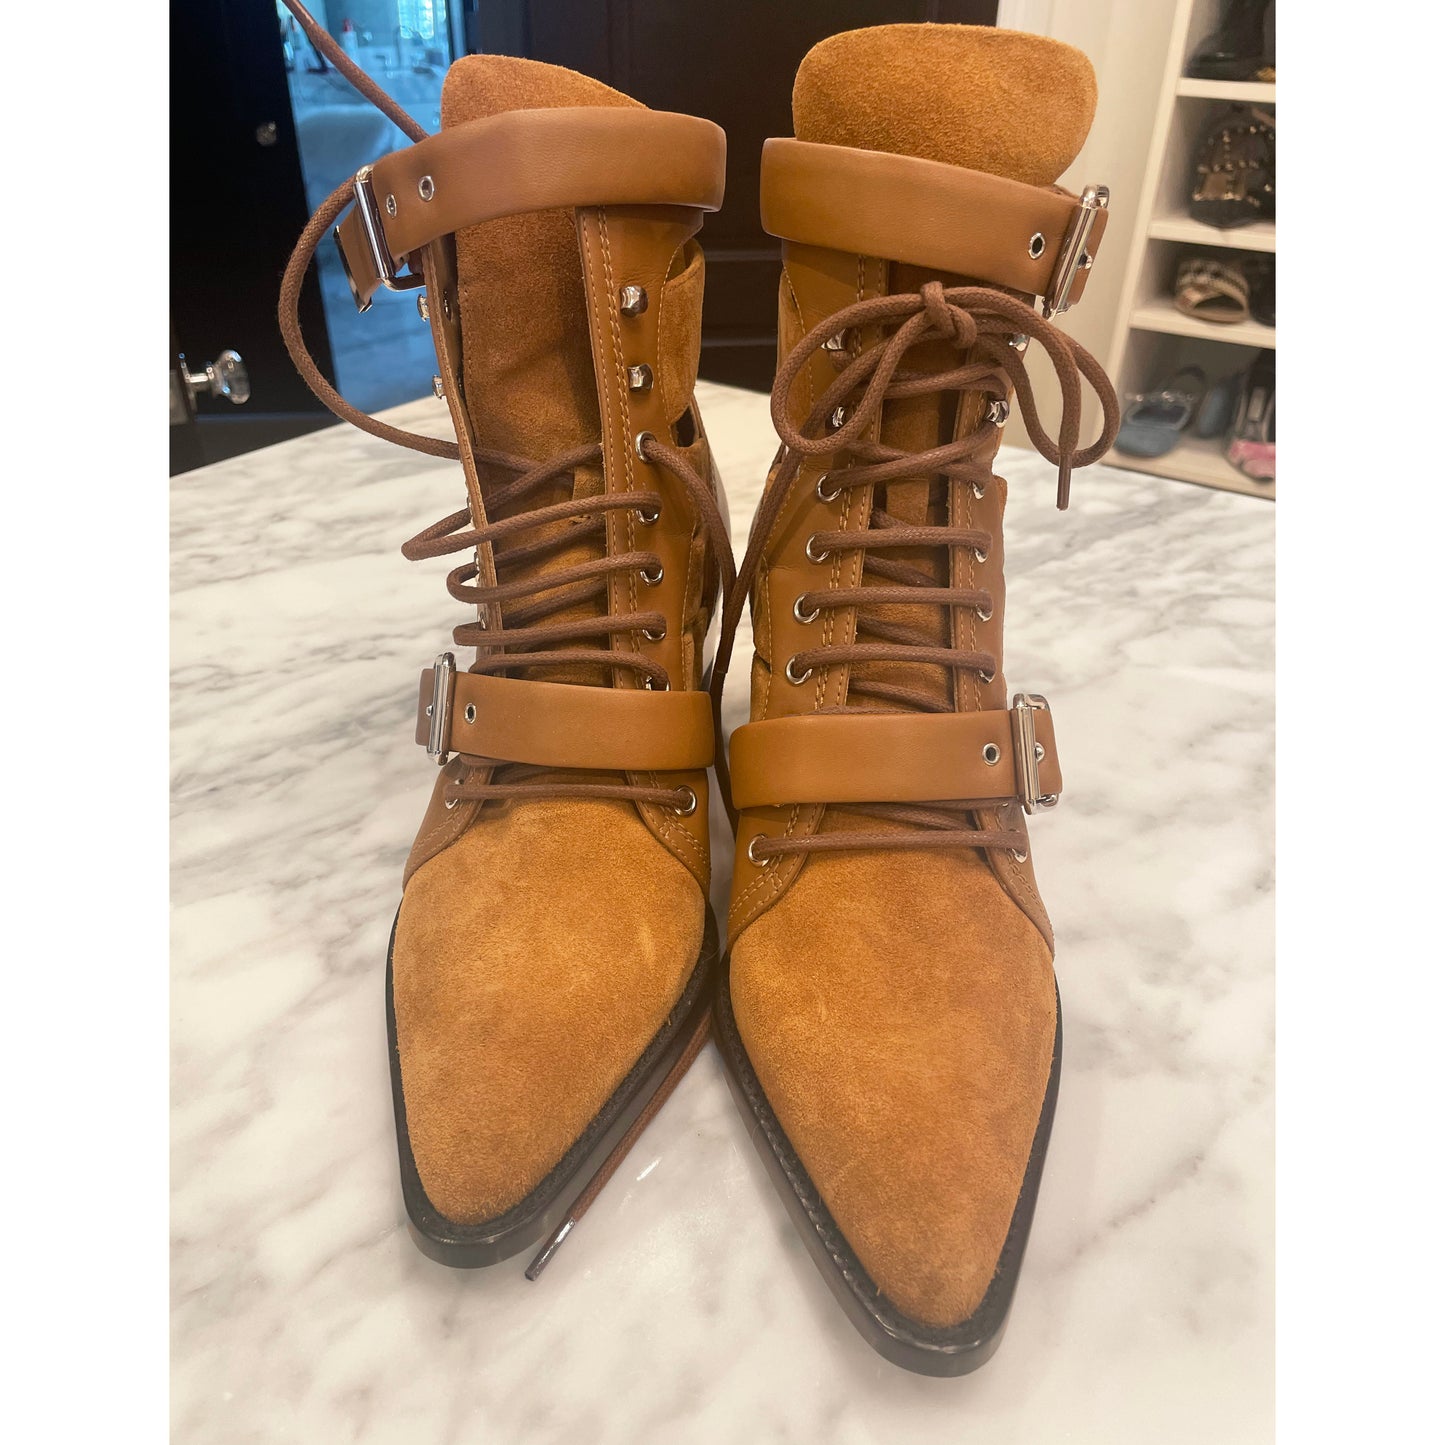 Chloe Rylie Boots in Tan Suede, size 41 (fits 10/10.5)